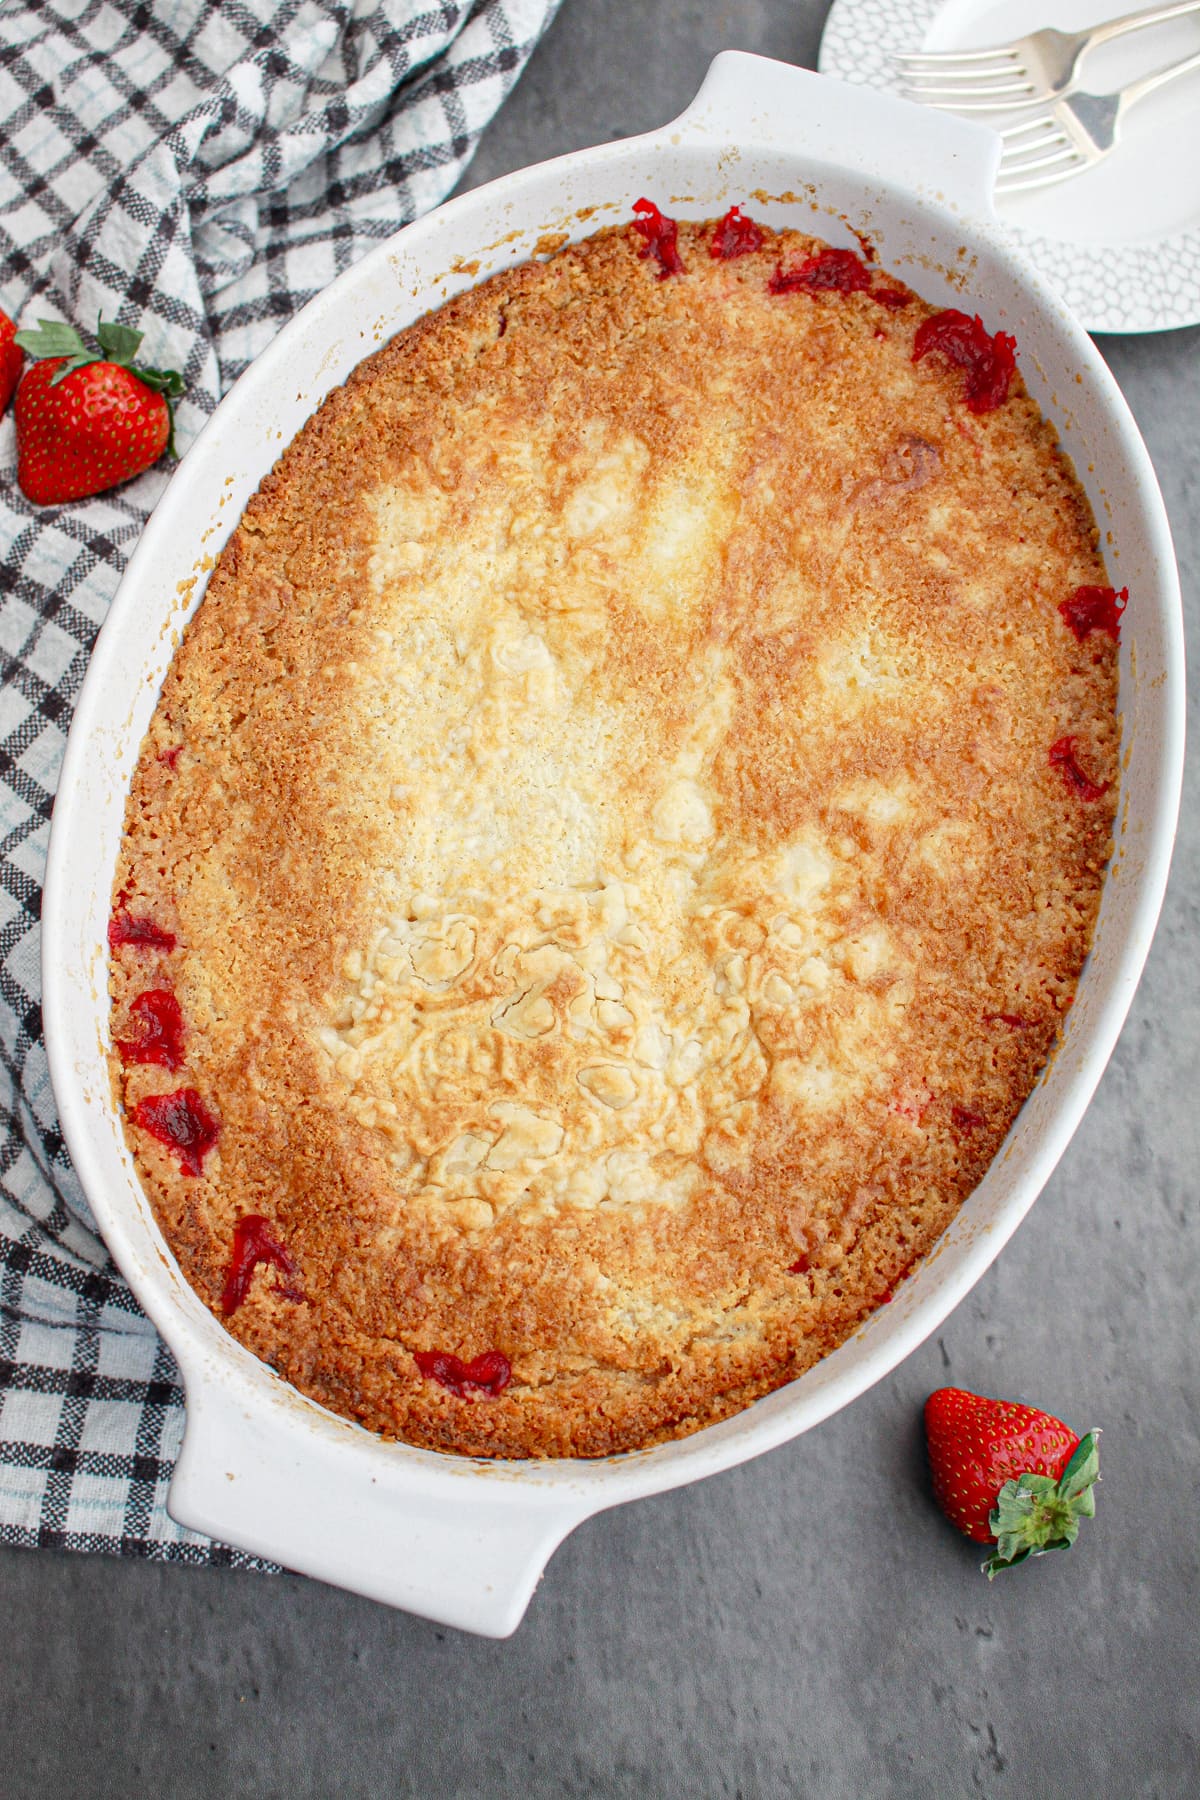 strawberry dump cake baked in dish